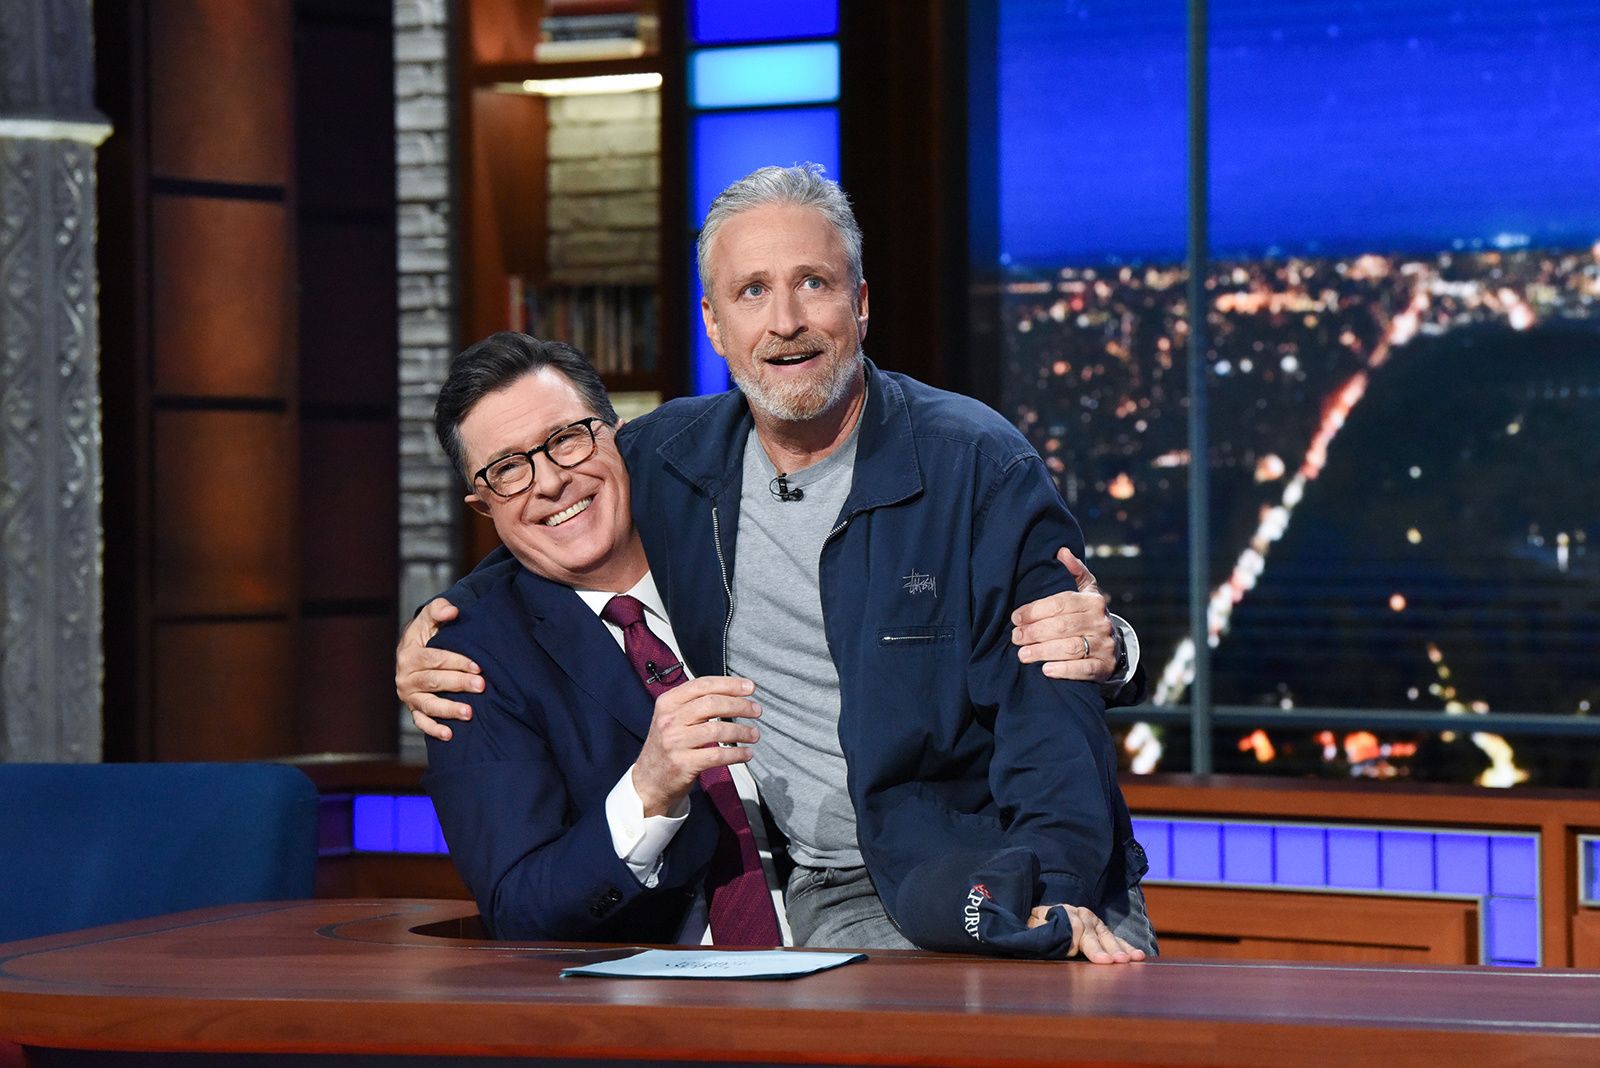 Stephen Colbert with Jon Stewart sitting on his lap on the set of The Late Show With Stephen Colbert